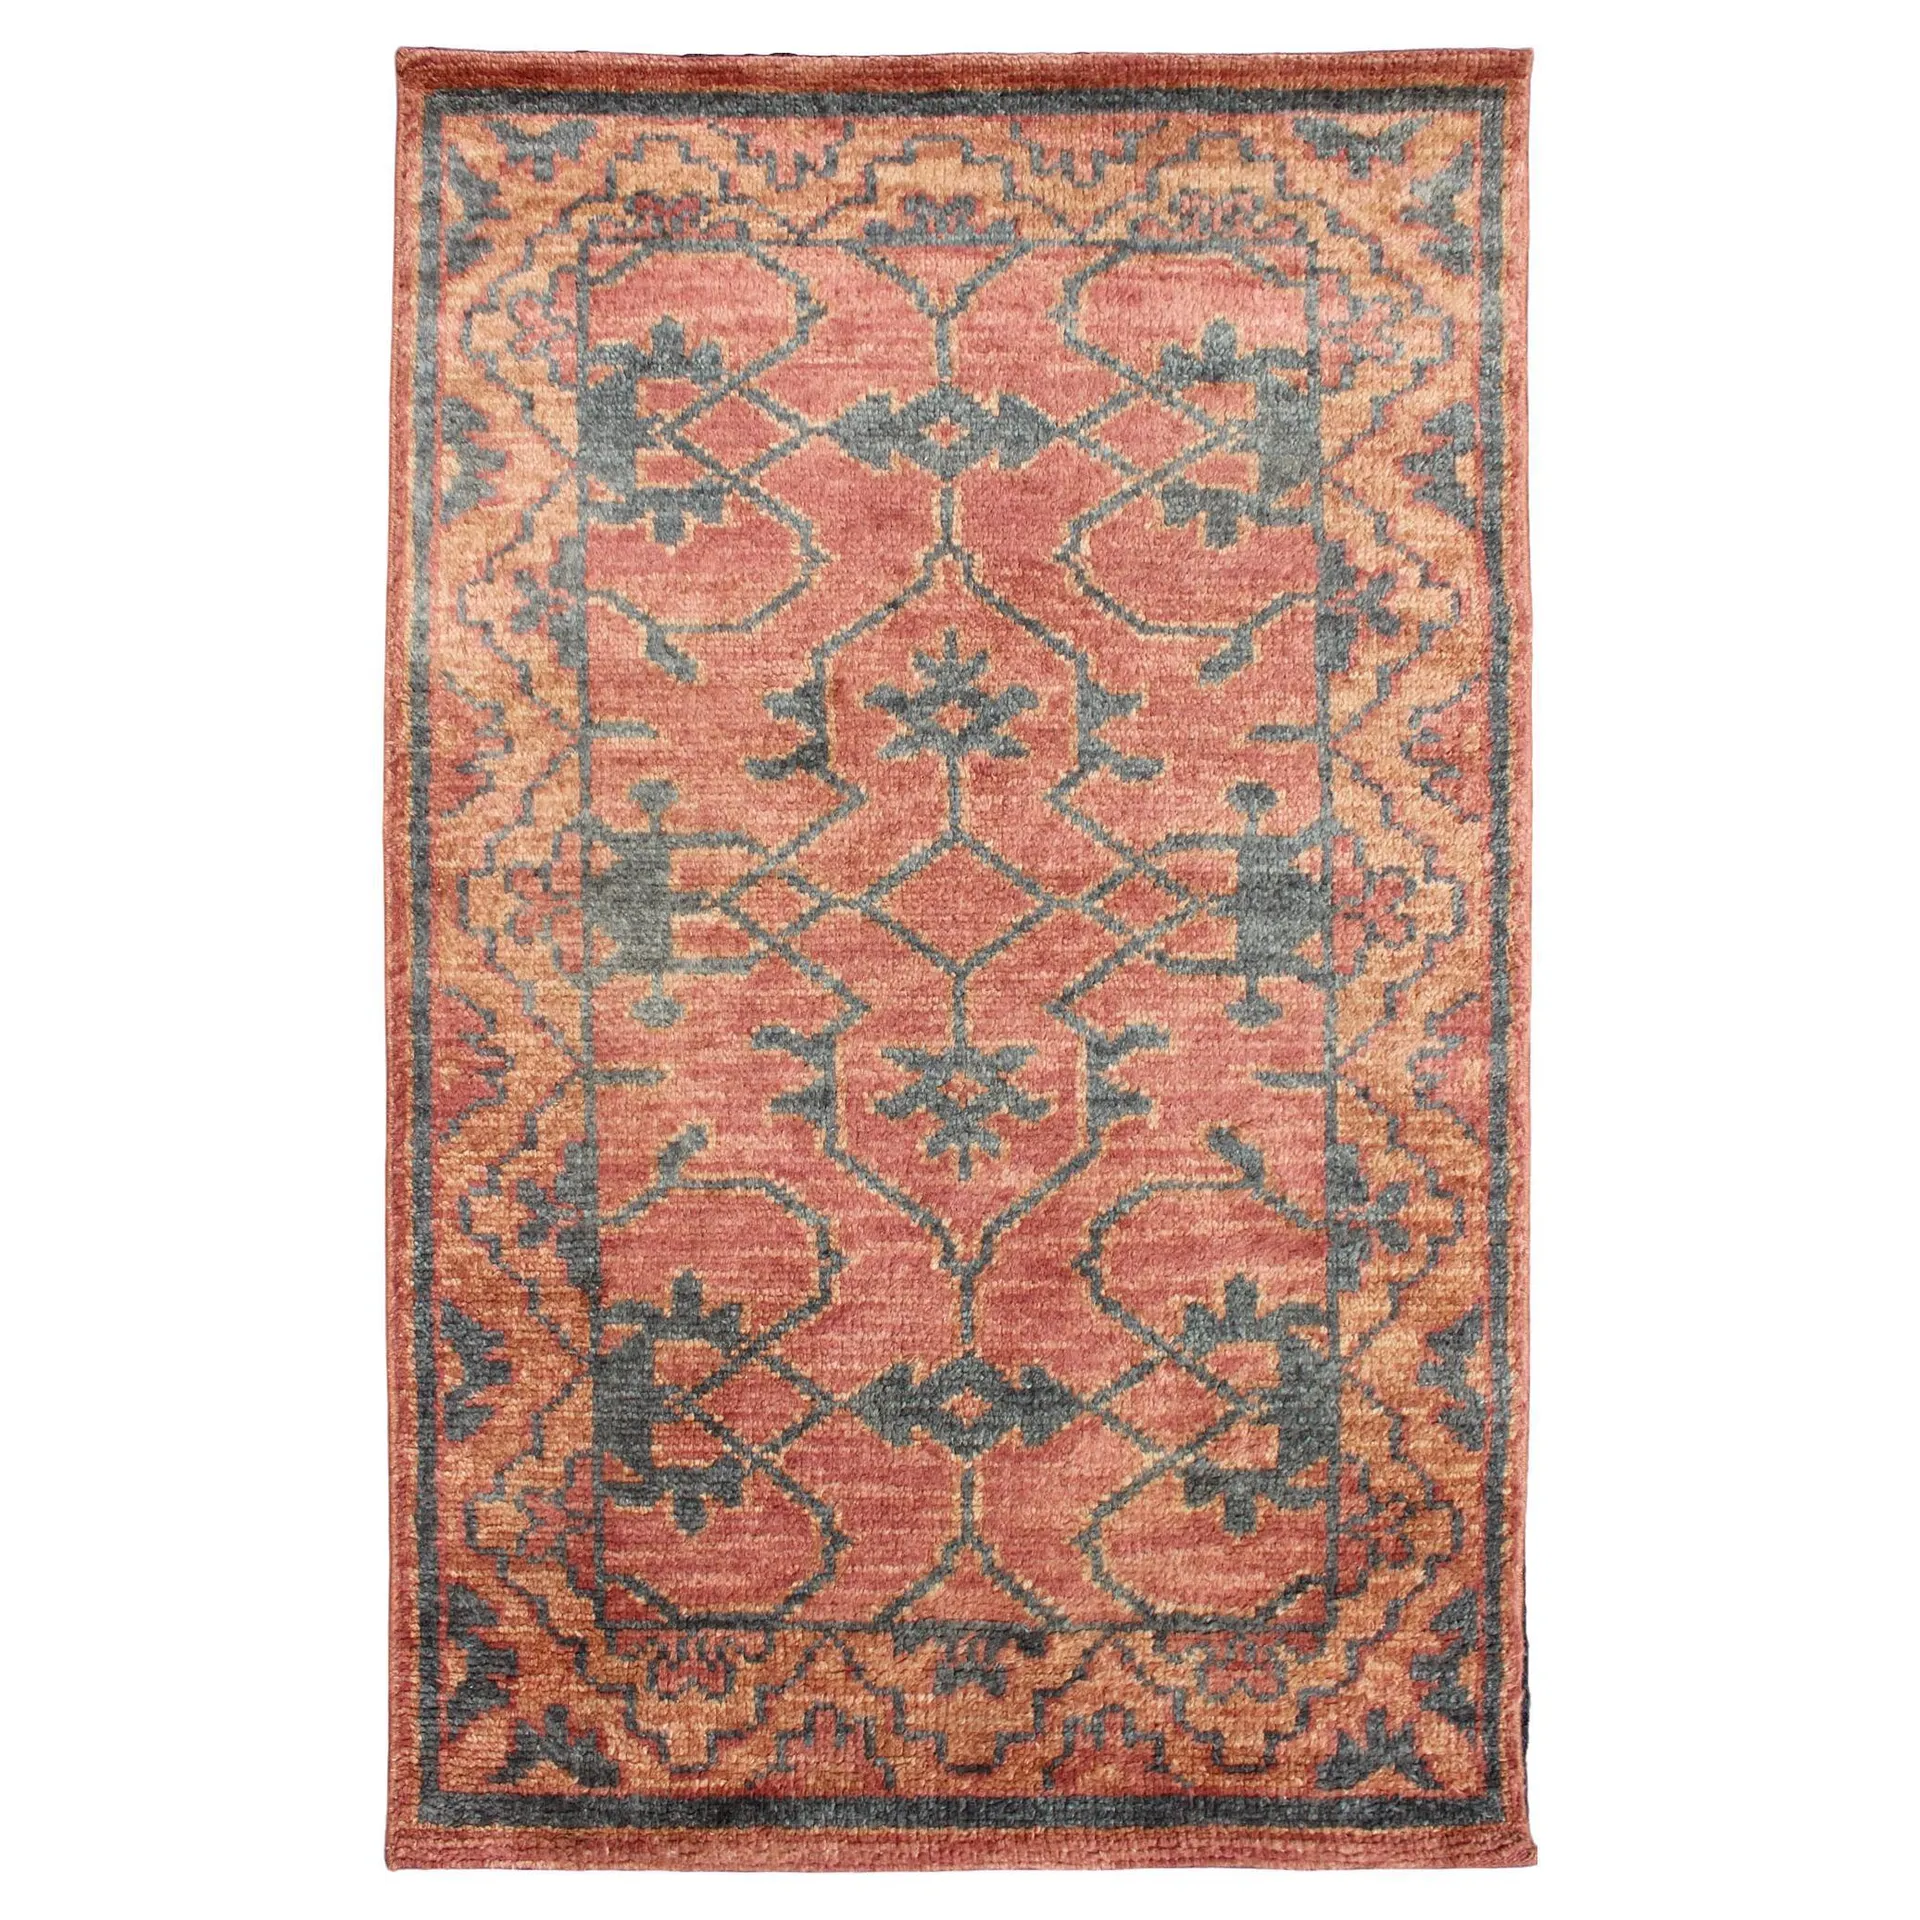 Modern Hand-Knotted Oushak Rug in Wool with Sub-Geometric Design in Terra-Cotta